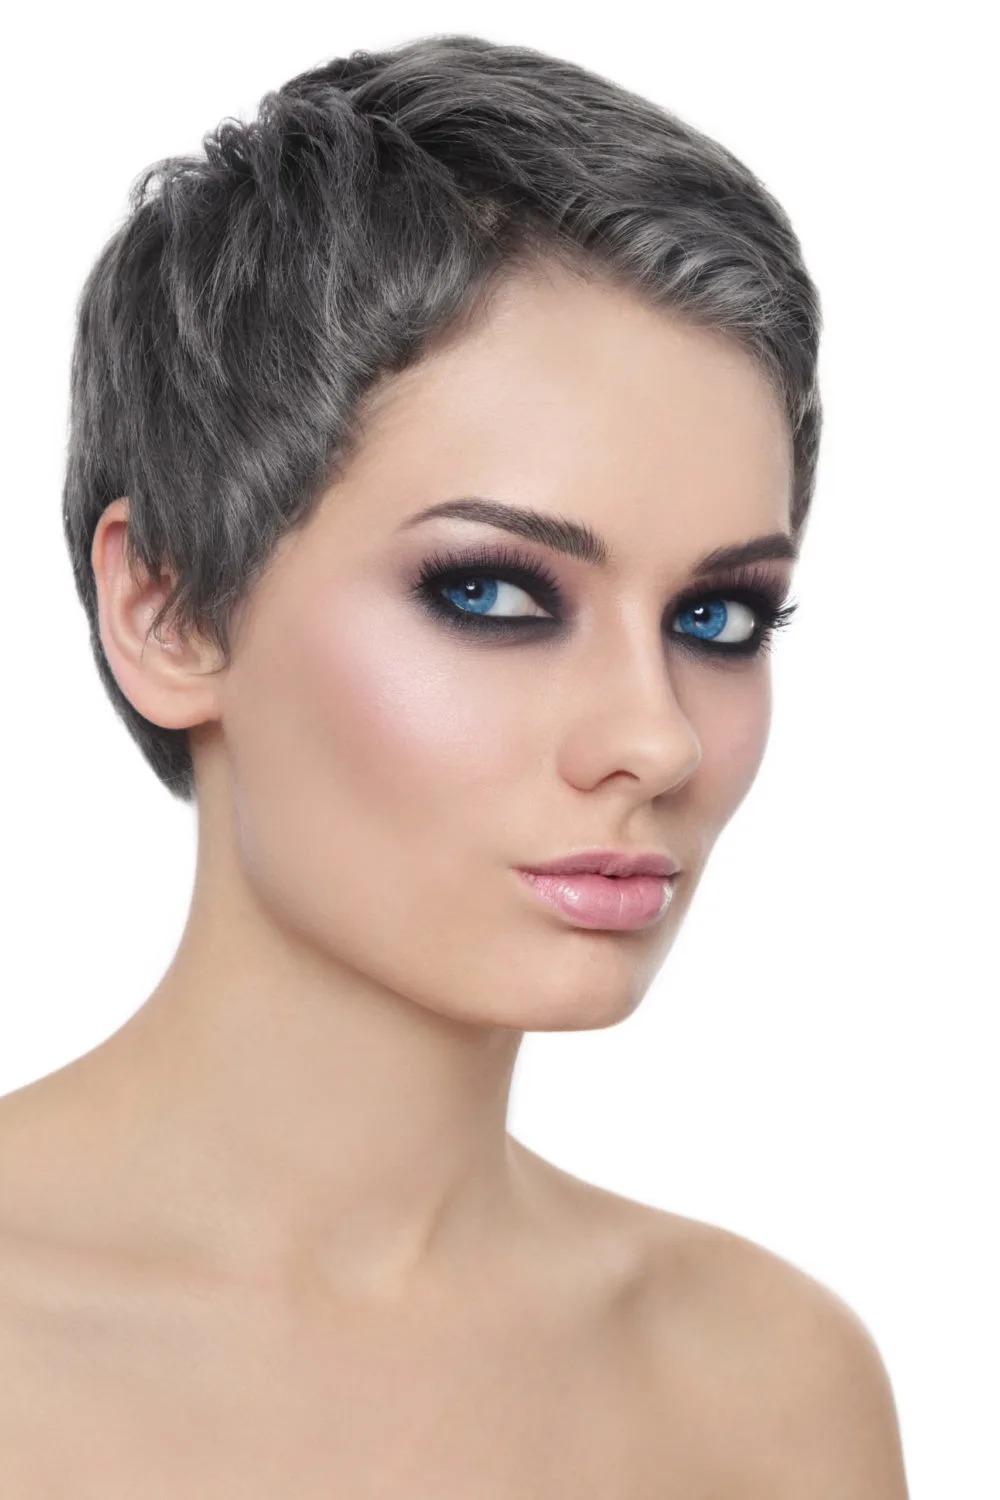 Tousled Short Crop, a trendy short grey hairstyle for women